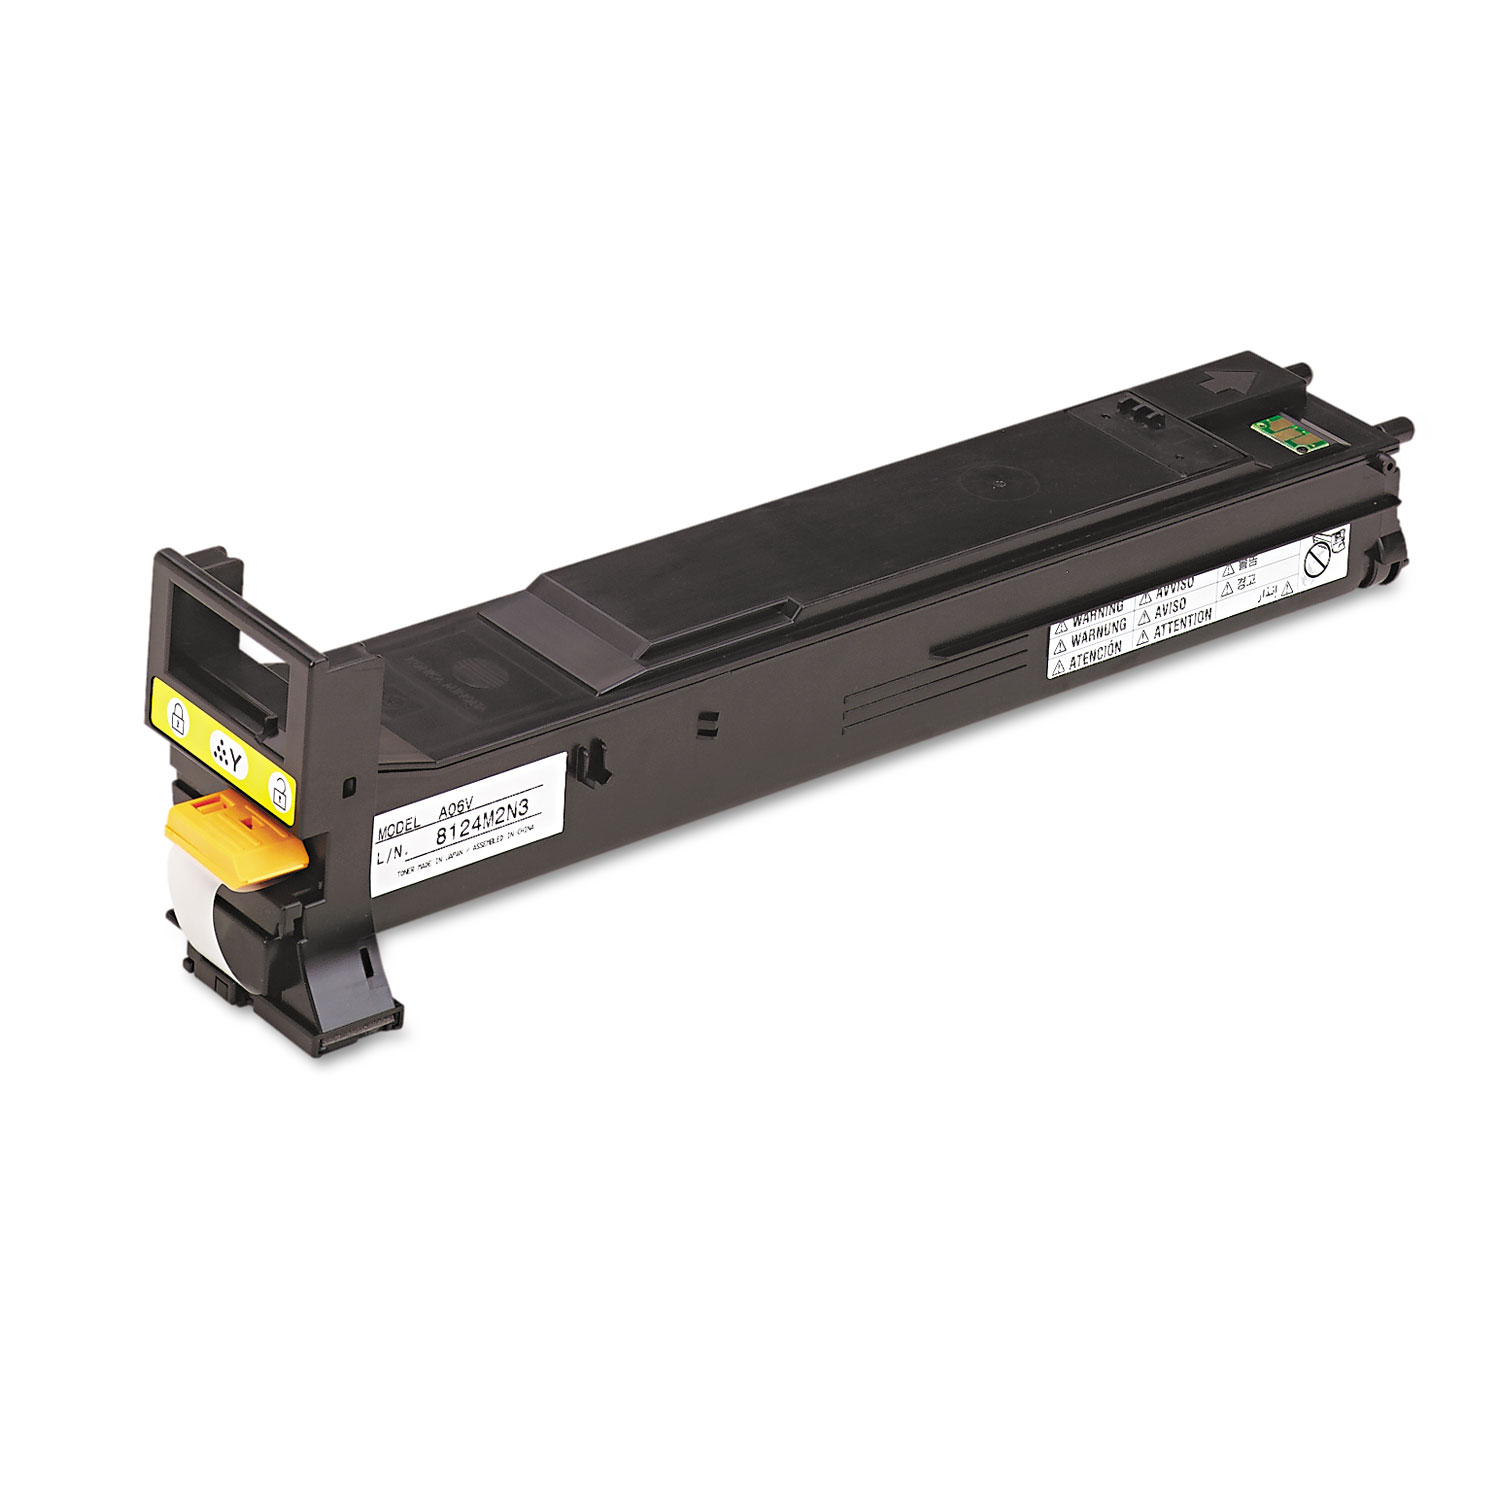 A06V233 High-Yield Toner, 12000 Page-Yield, Yellow